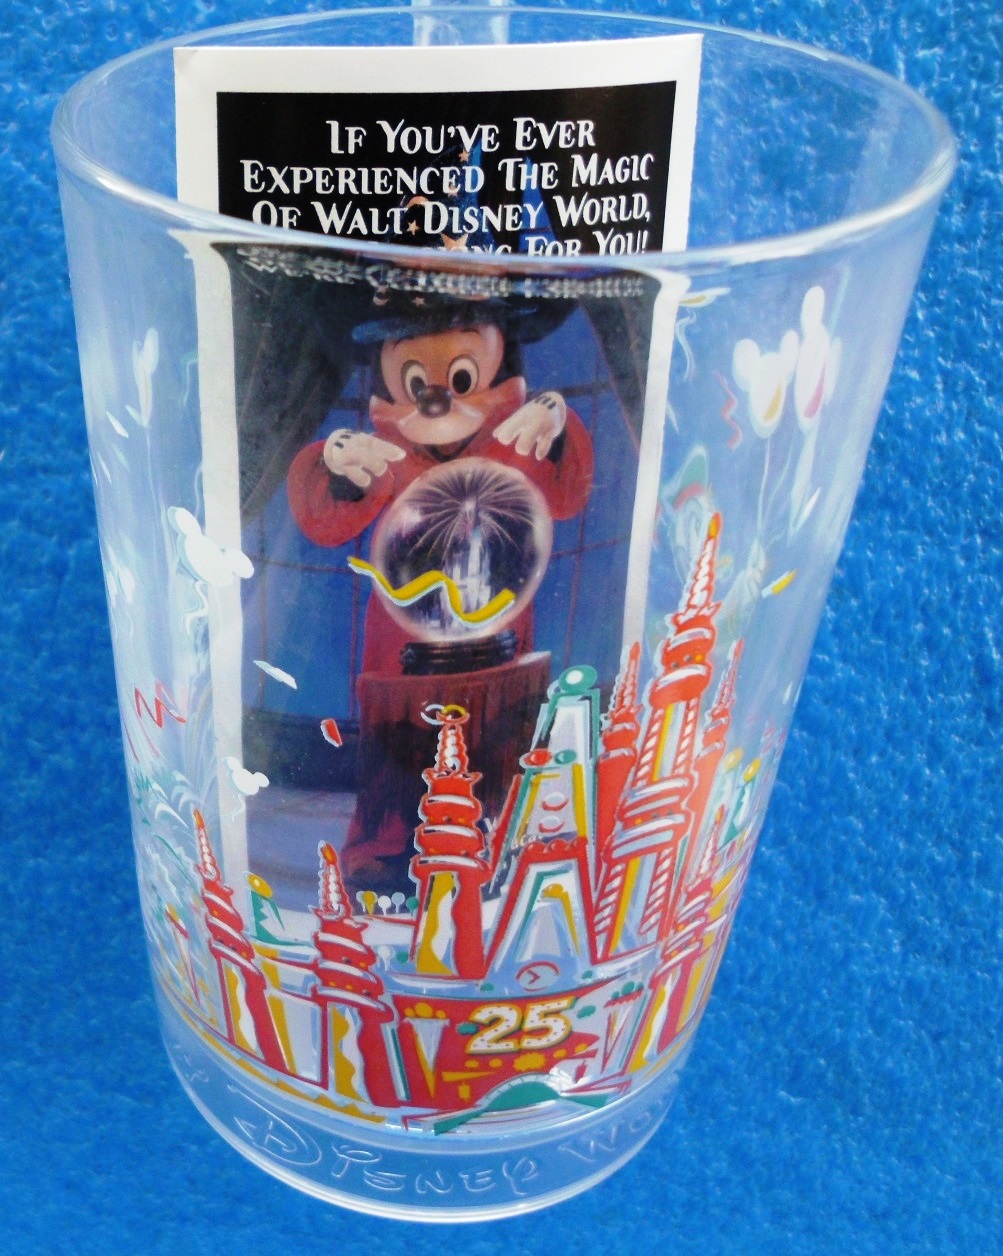 https://www.nowandthencollectibles.com/Catalog2/wp-content/uploads/2020/11/Walt-Disney-World-25th-Anniversary-Glass-Remember-The-Magic-1996-Collection-2.jpg